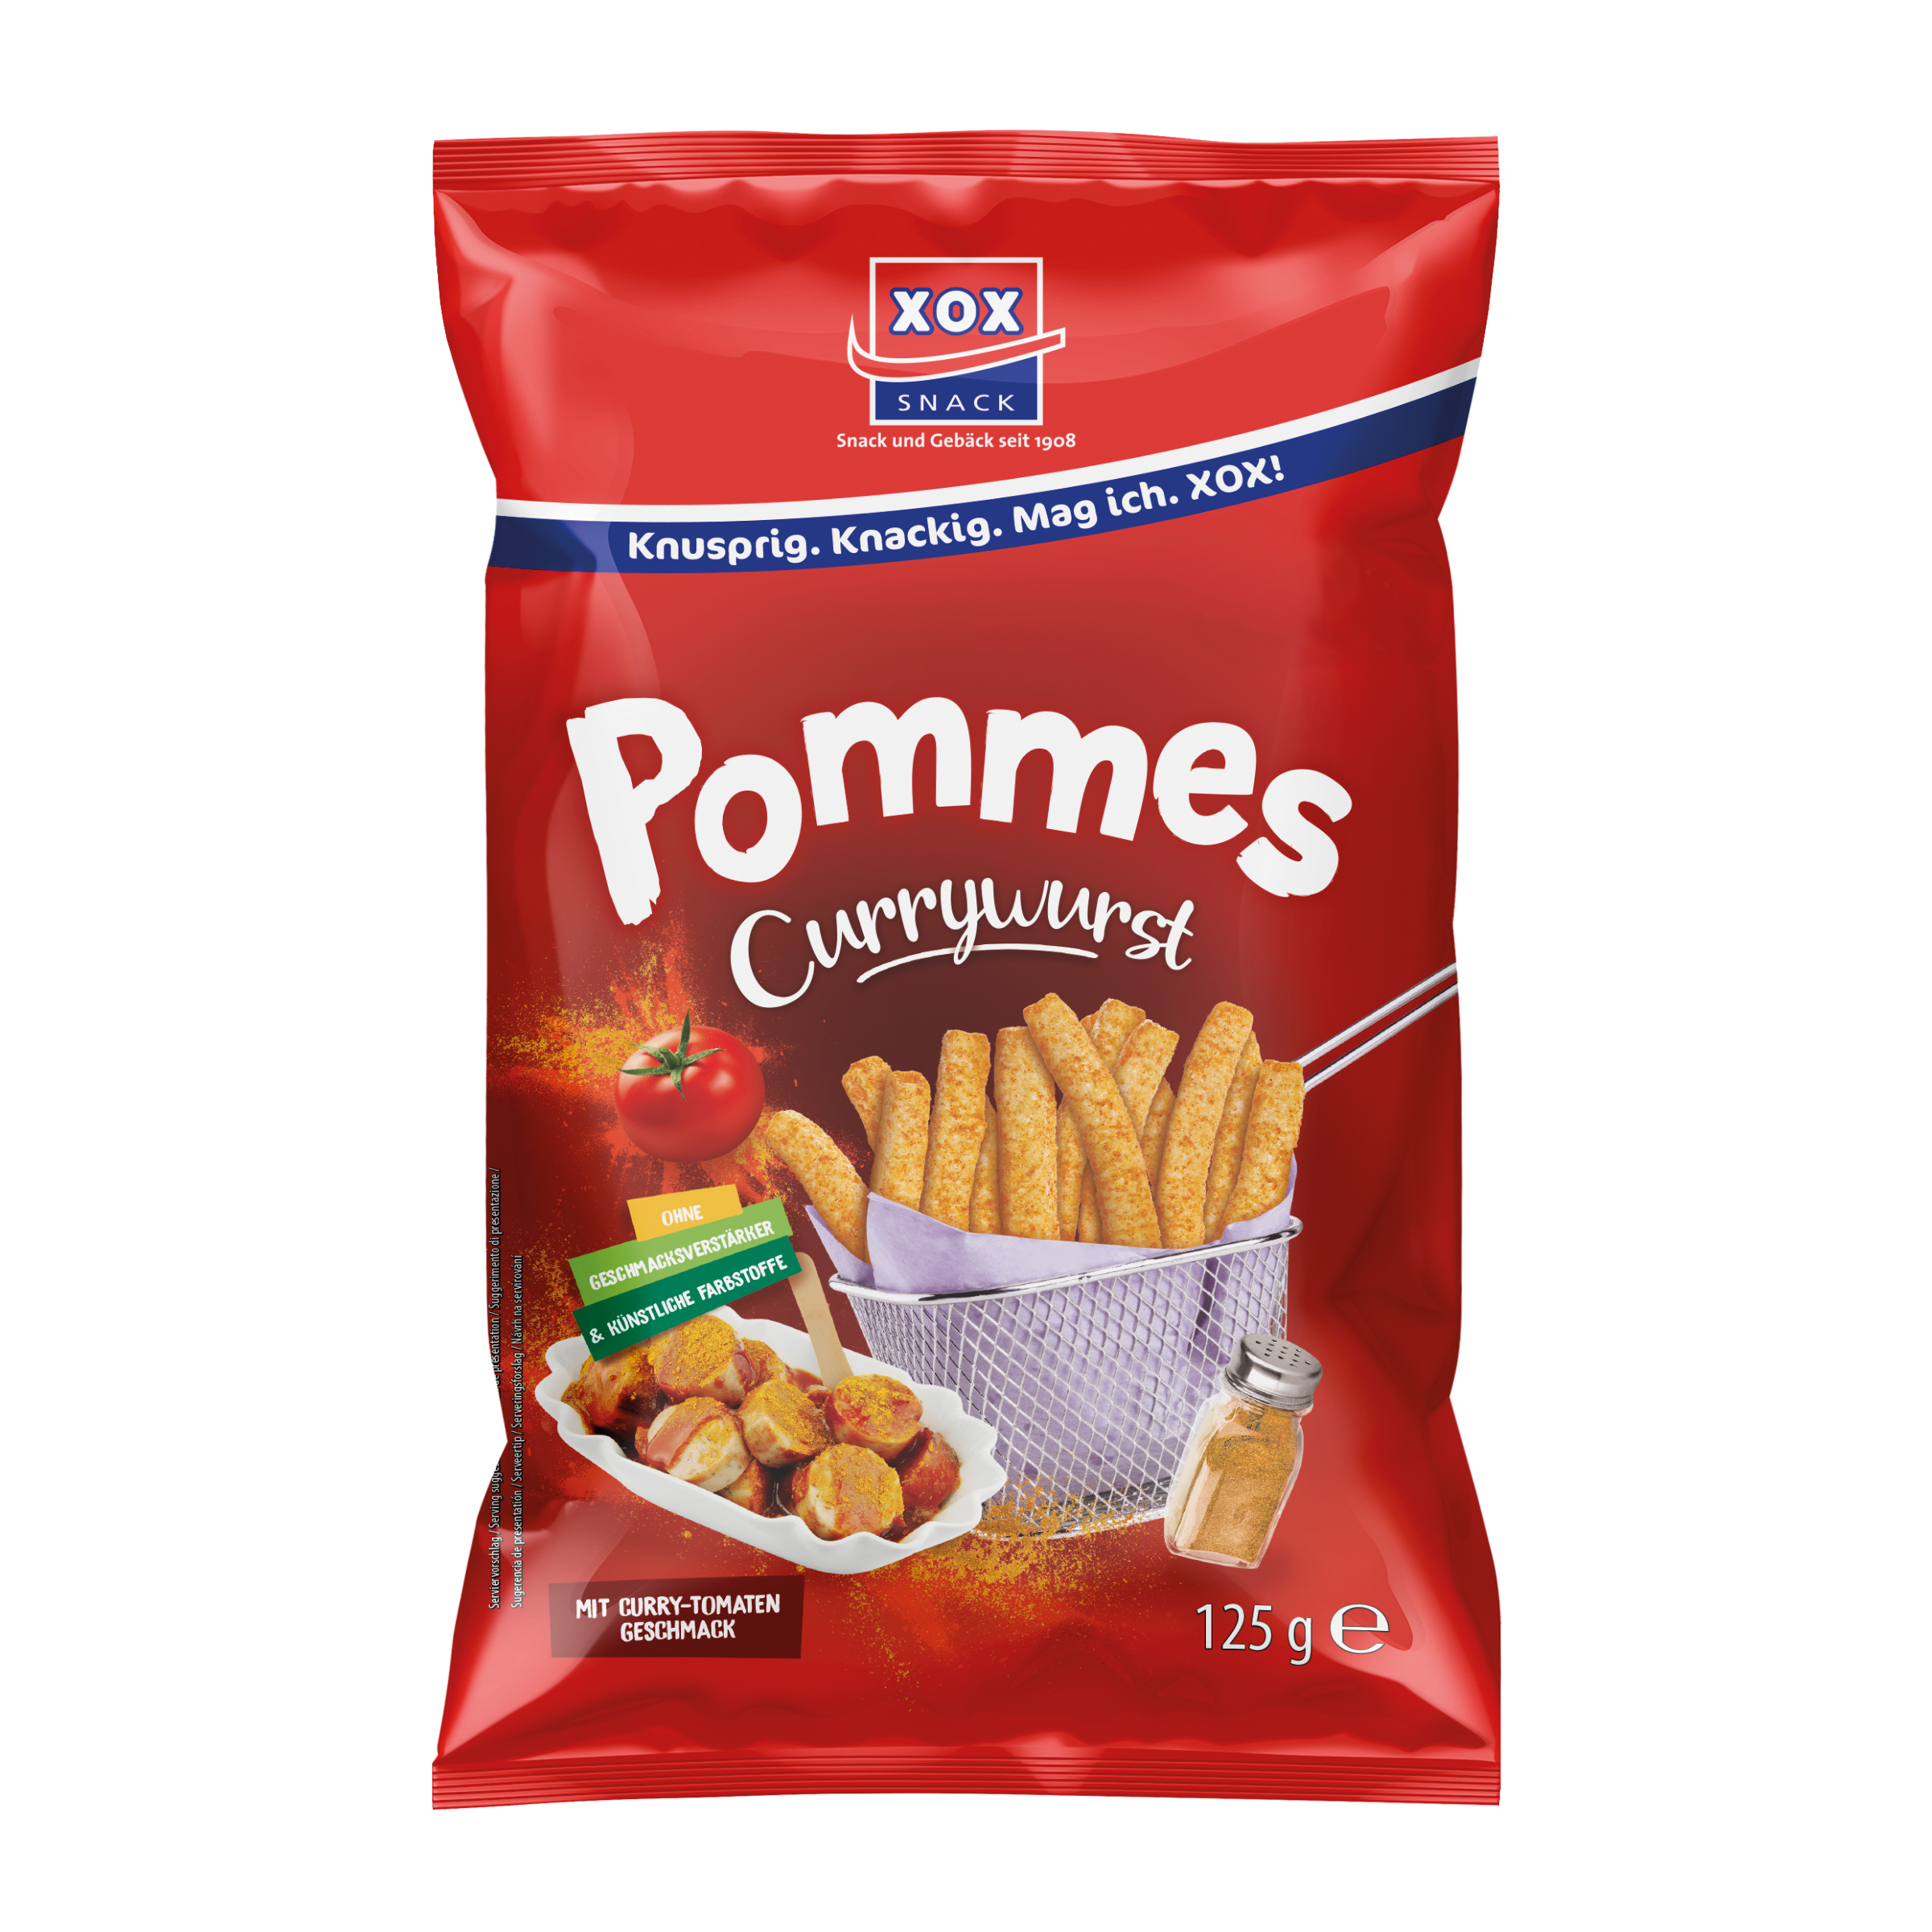 XOX Pommes Currywurst 125g - XOX Group